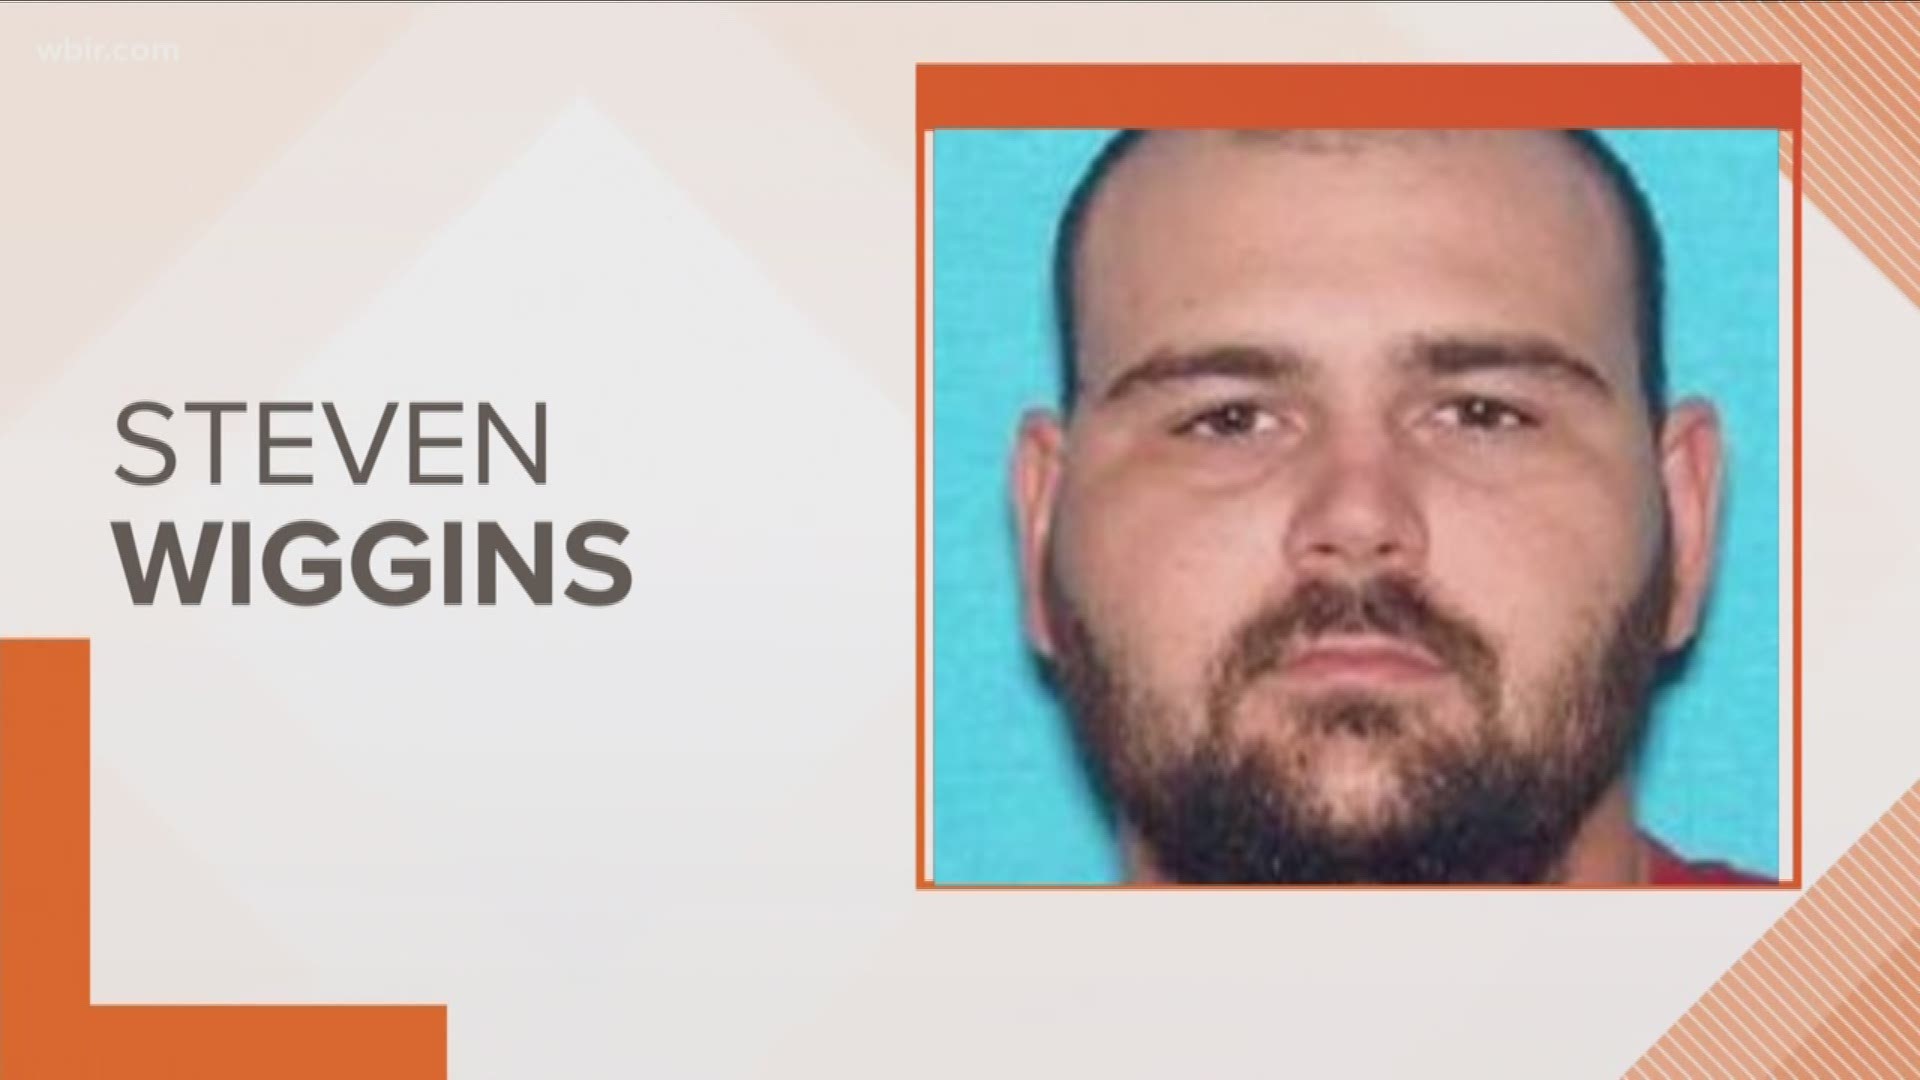 A search is underway in Middle Tennessee for a suspect involved in an early morning altercation with the deputy who was found killed after a vehicle was reported stolen in Kingston Springs, according to officials.